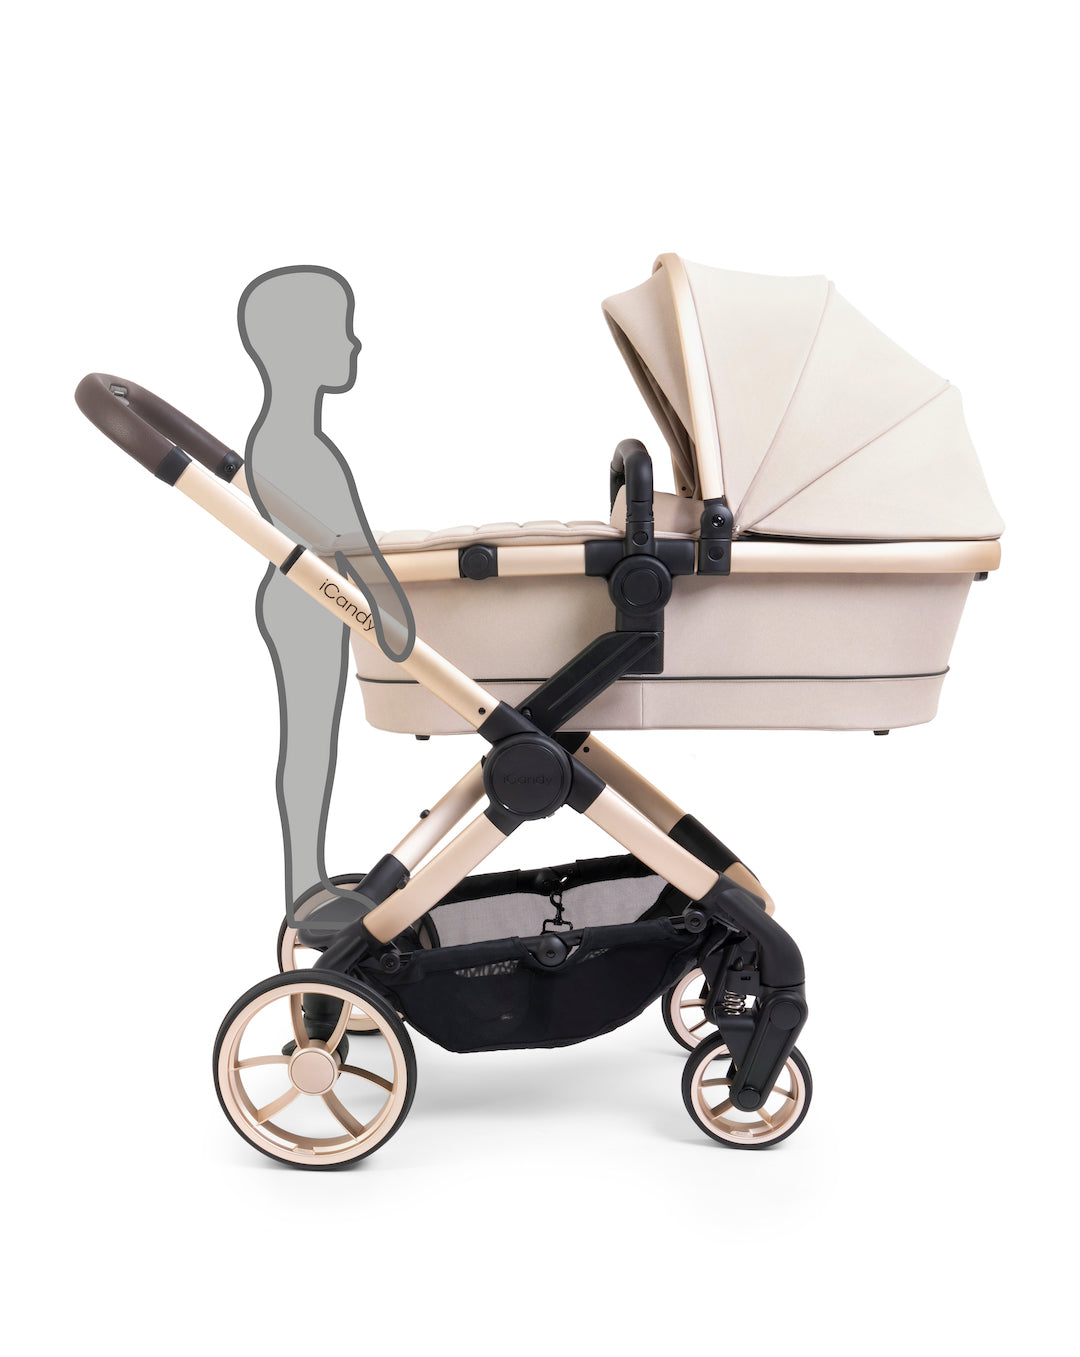 iCandy Peach 7 Pushchair & Maxi Cosi Pebble 360 PRO Travel System Bundle - Biscotti | Blonde Chassis